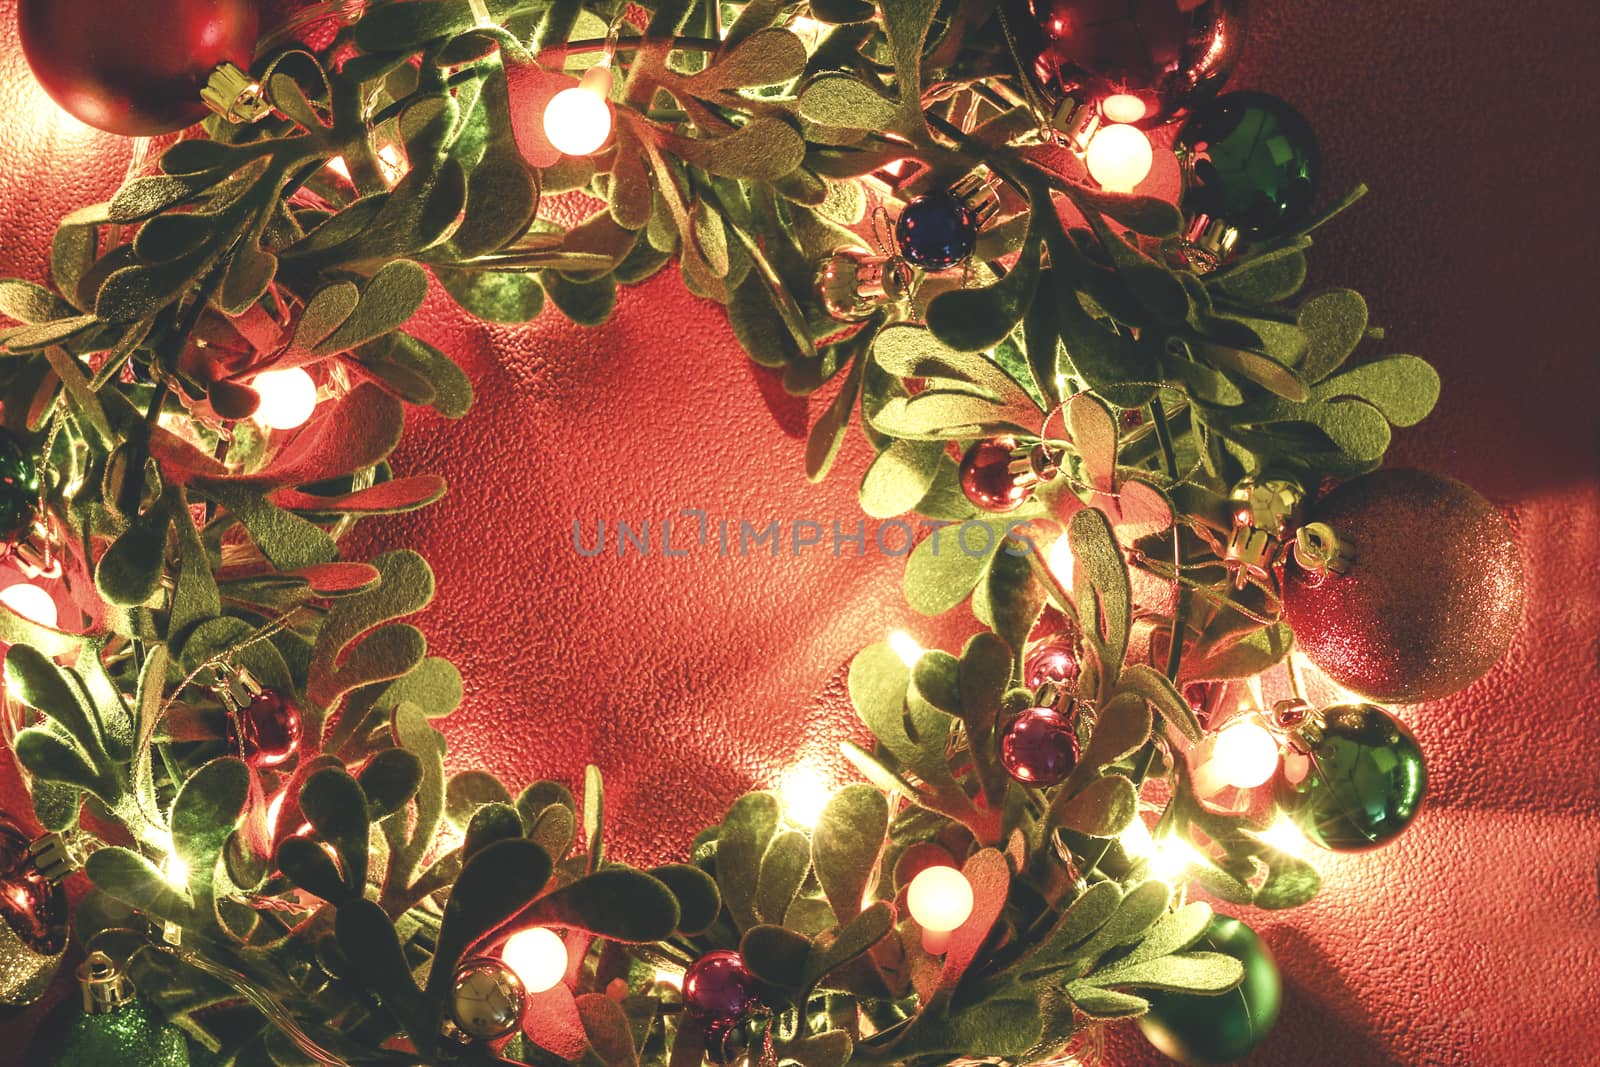 Greeting Season concept.Christmas wreath with decorative light on red background